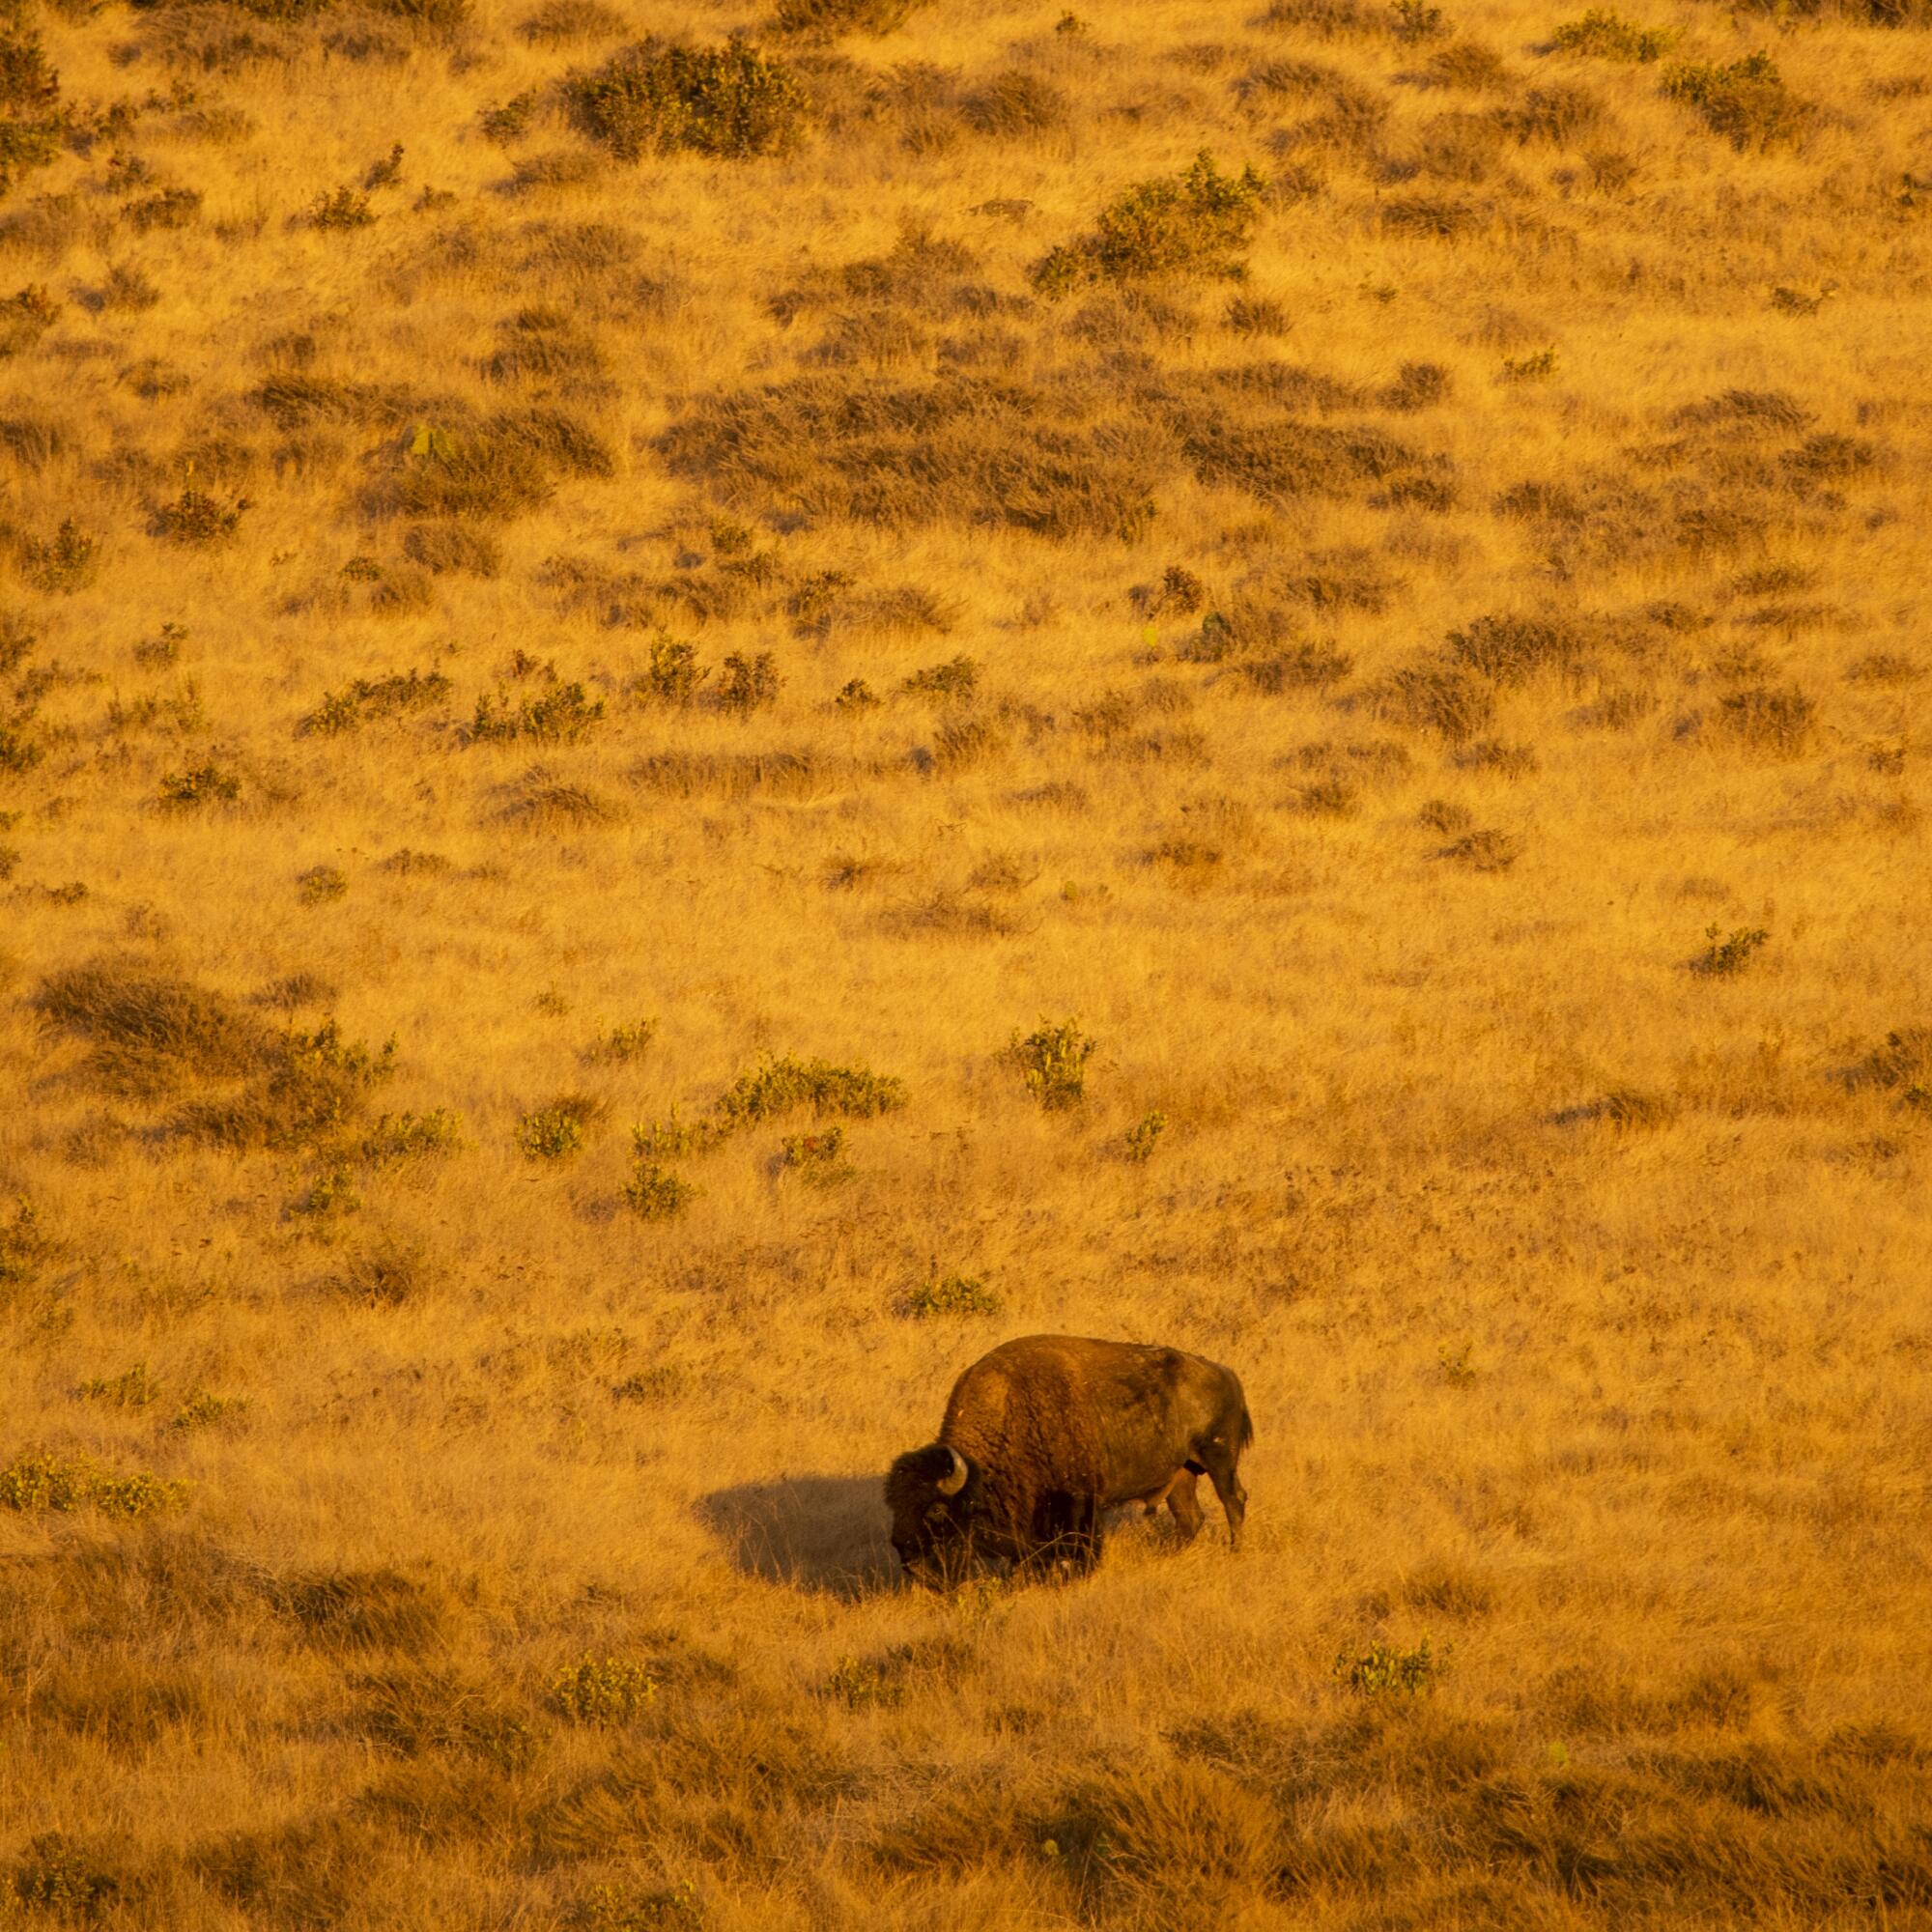 A North American Bison roams free and grazes near Little Harbor campground in Catalina.